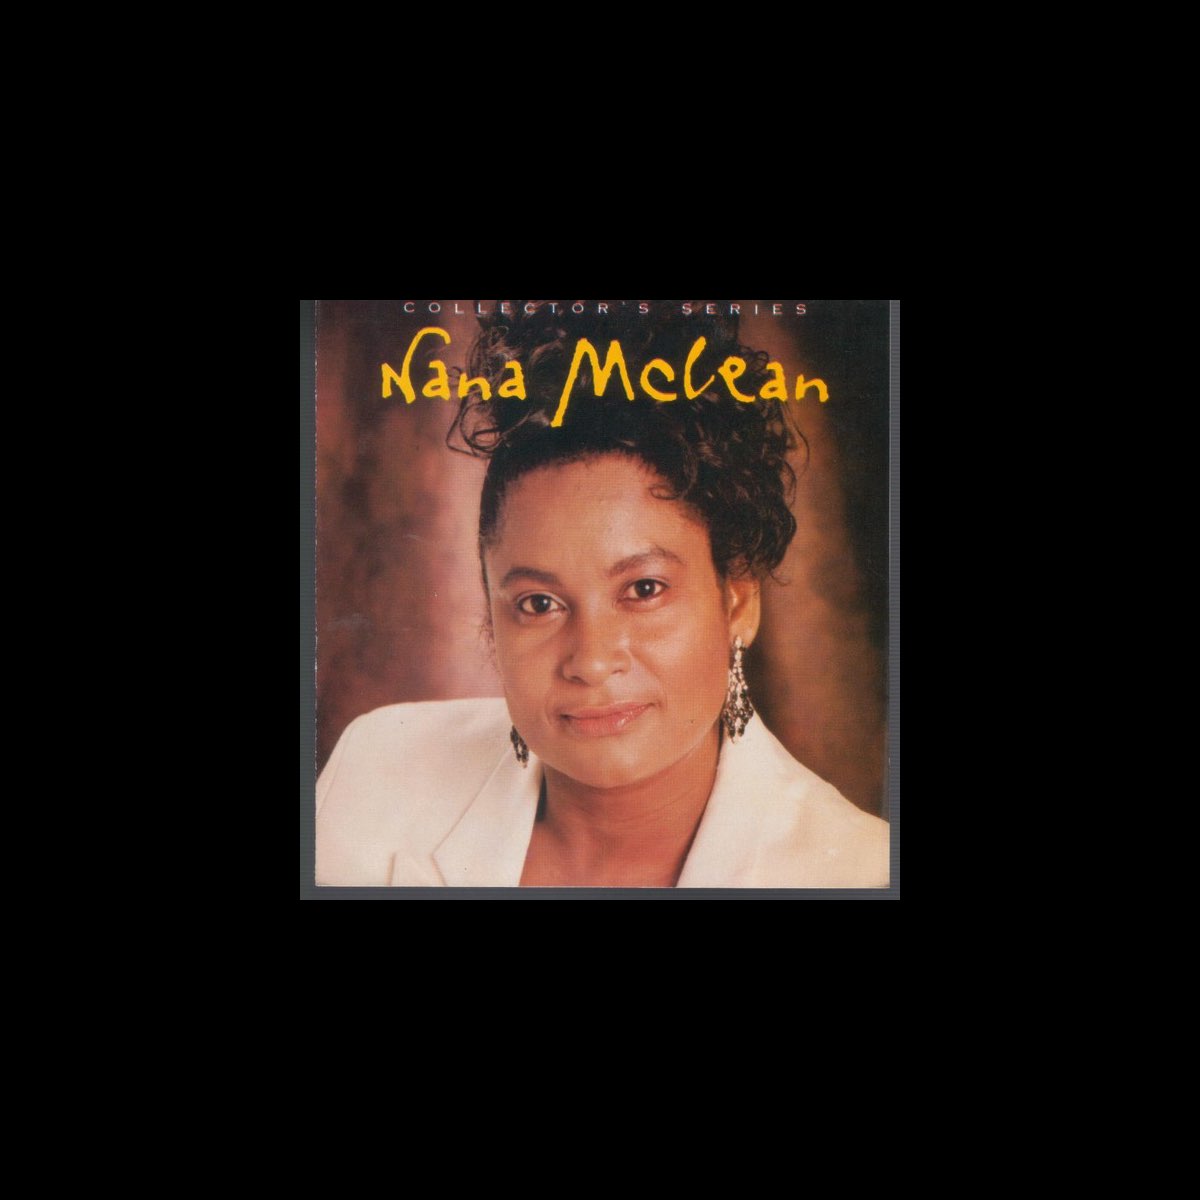 ‎Nana McLean - Collector's Series by Nana McLean on Apple Music